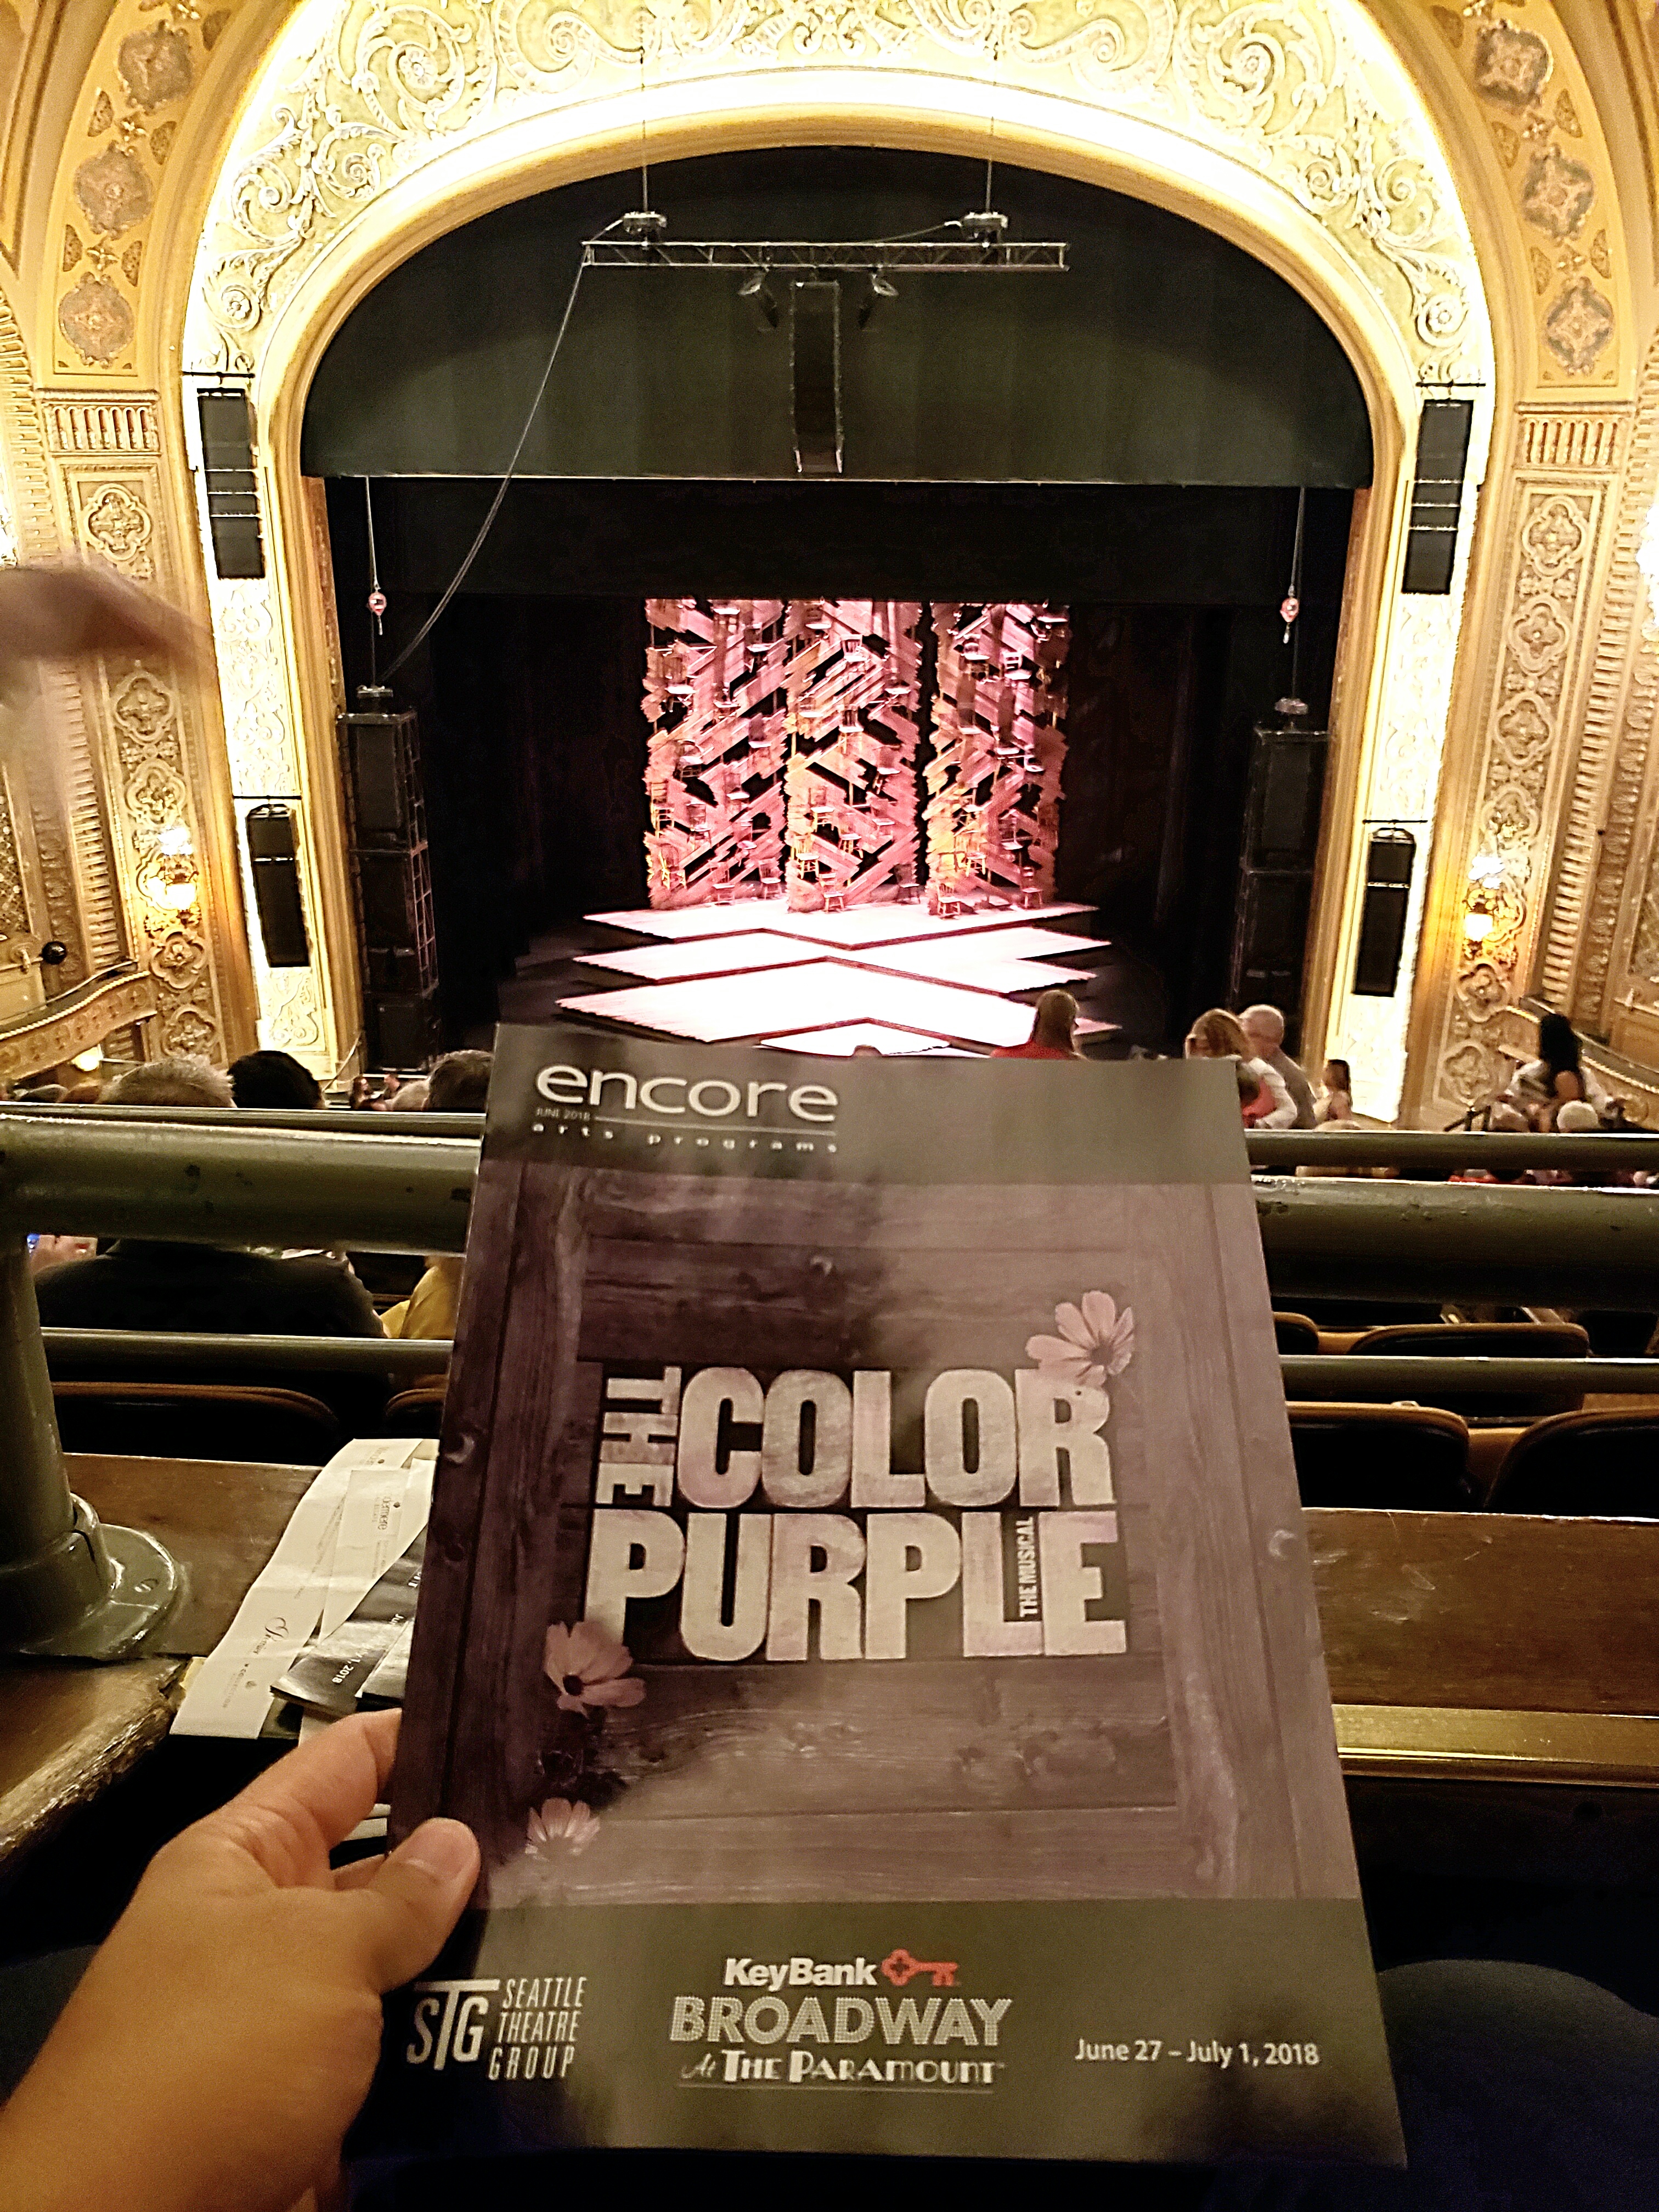 Evening performance of The Color Purple Musical. Men and the patriarchal system suck! Also, I've never seen the movie but I can't imagine Oprah Winfrey as Sofia.